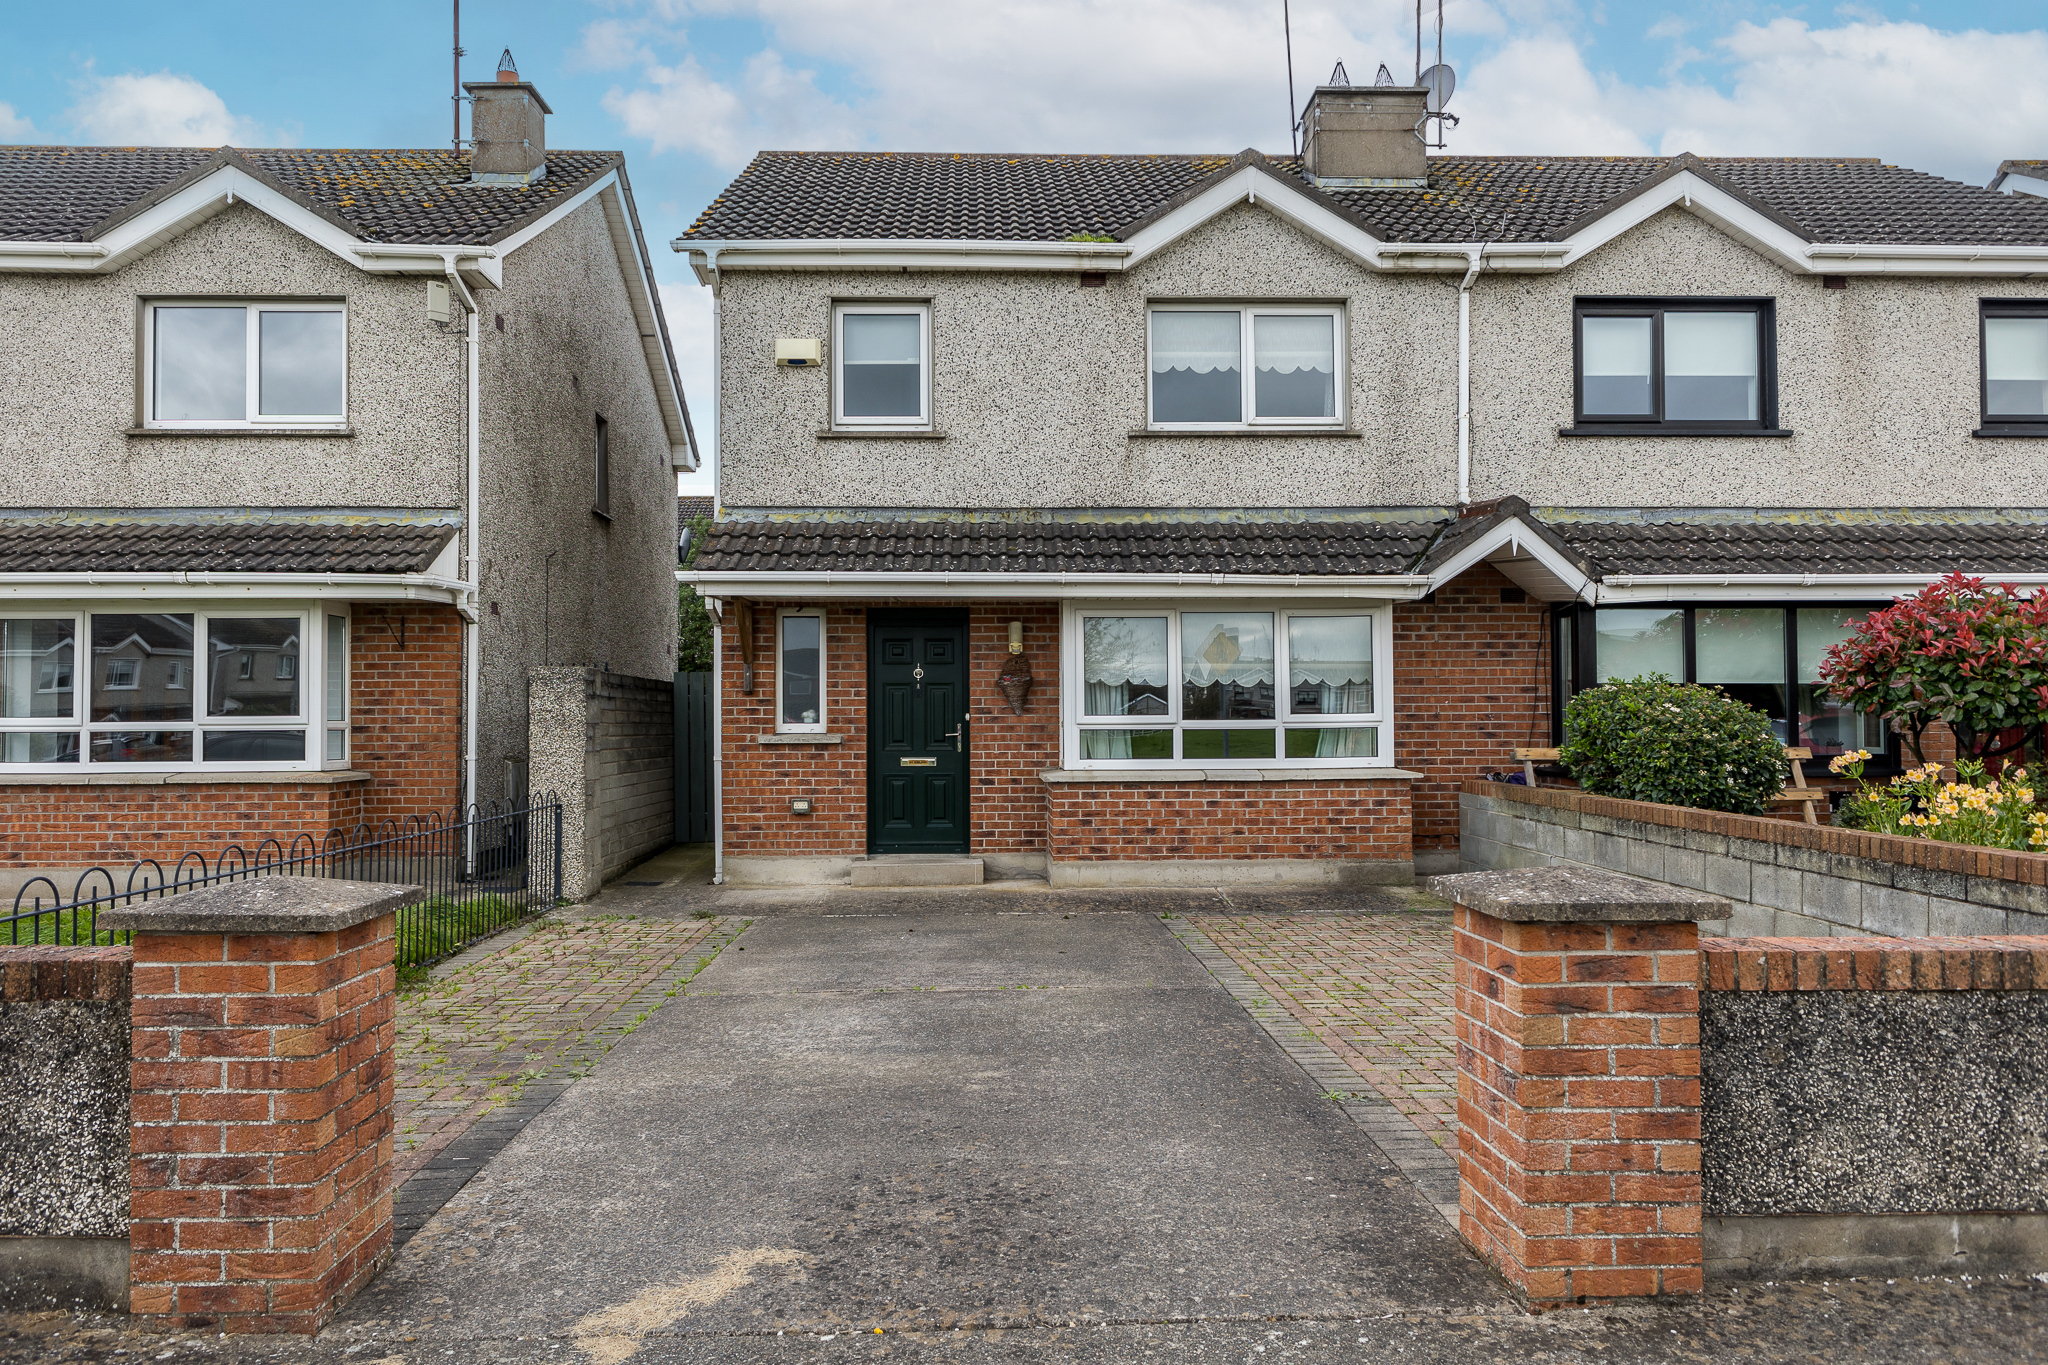 42 Castle Manor Drogheda Co Louth